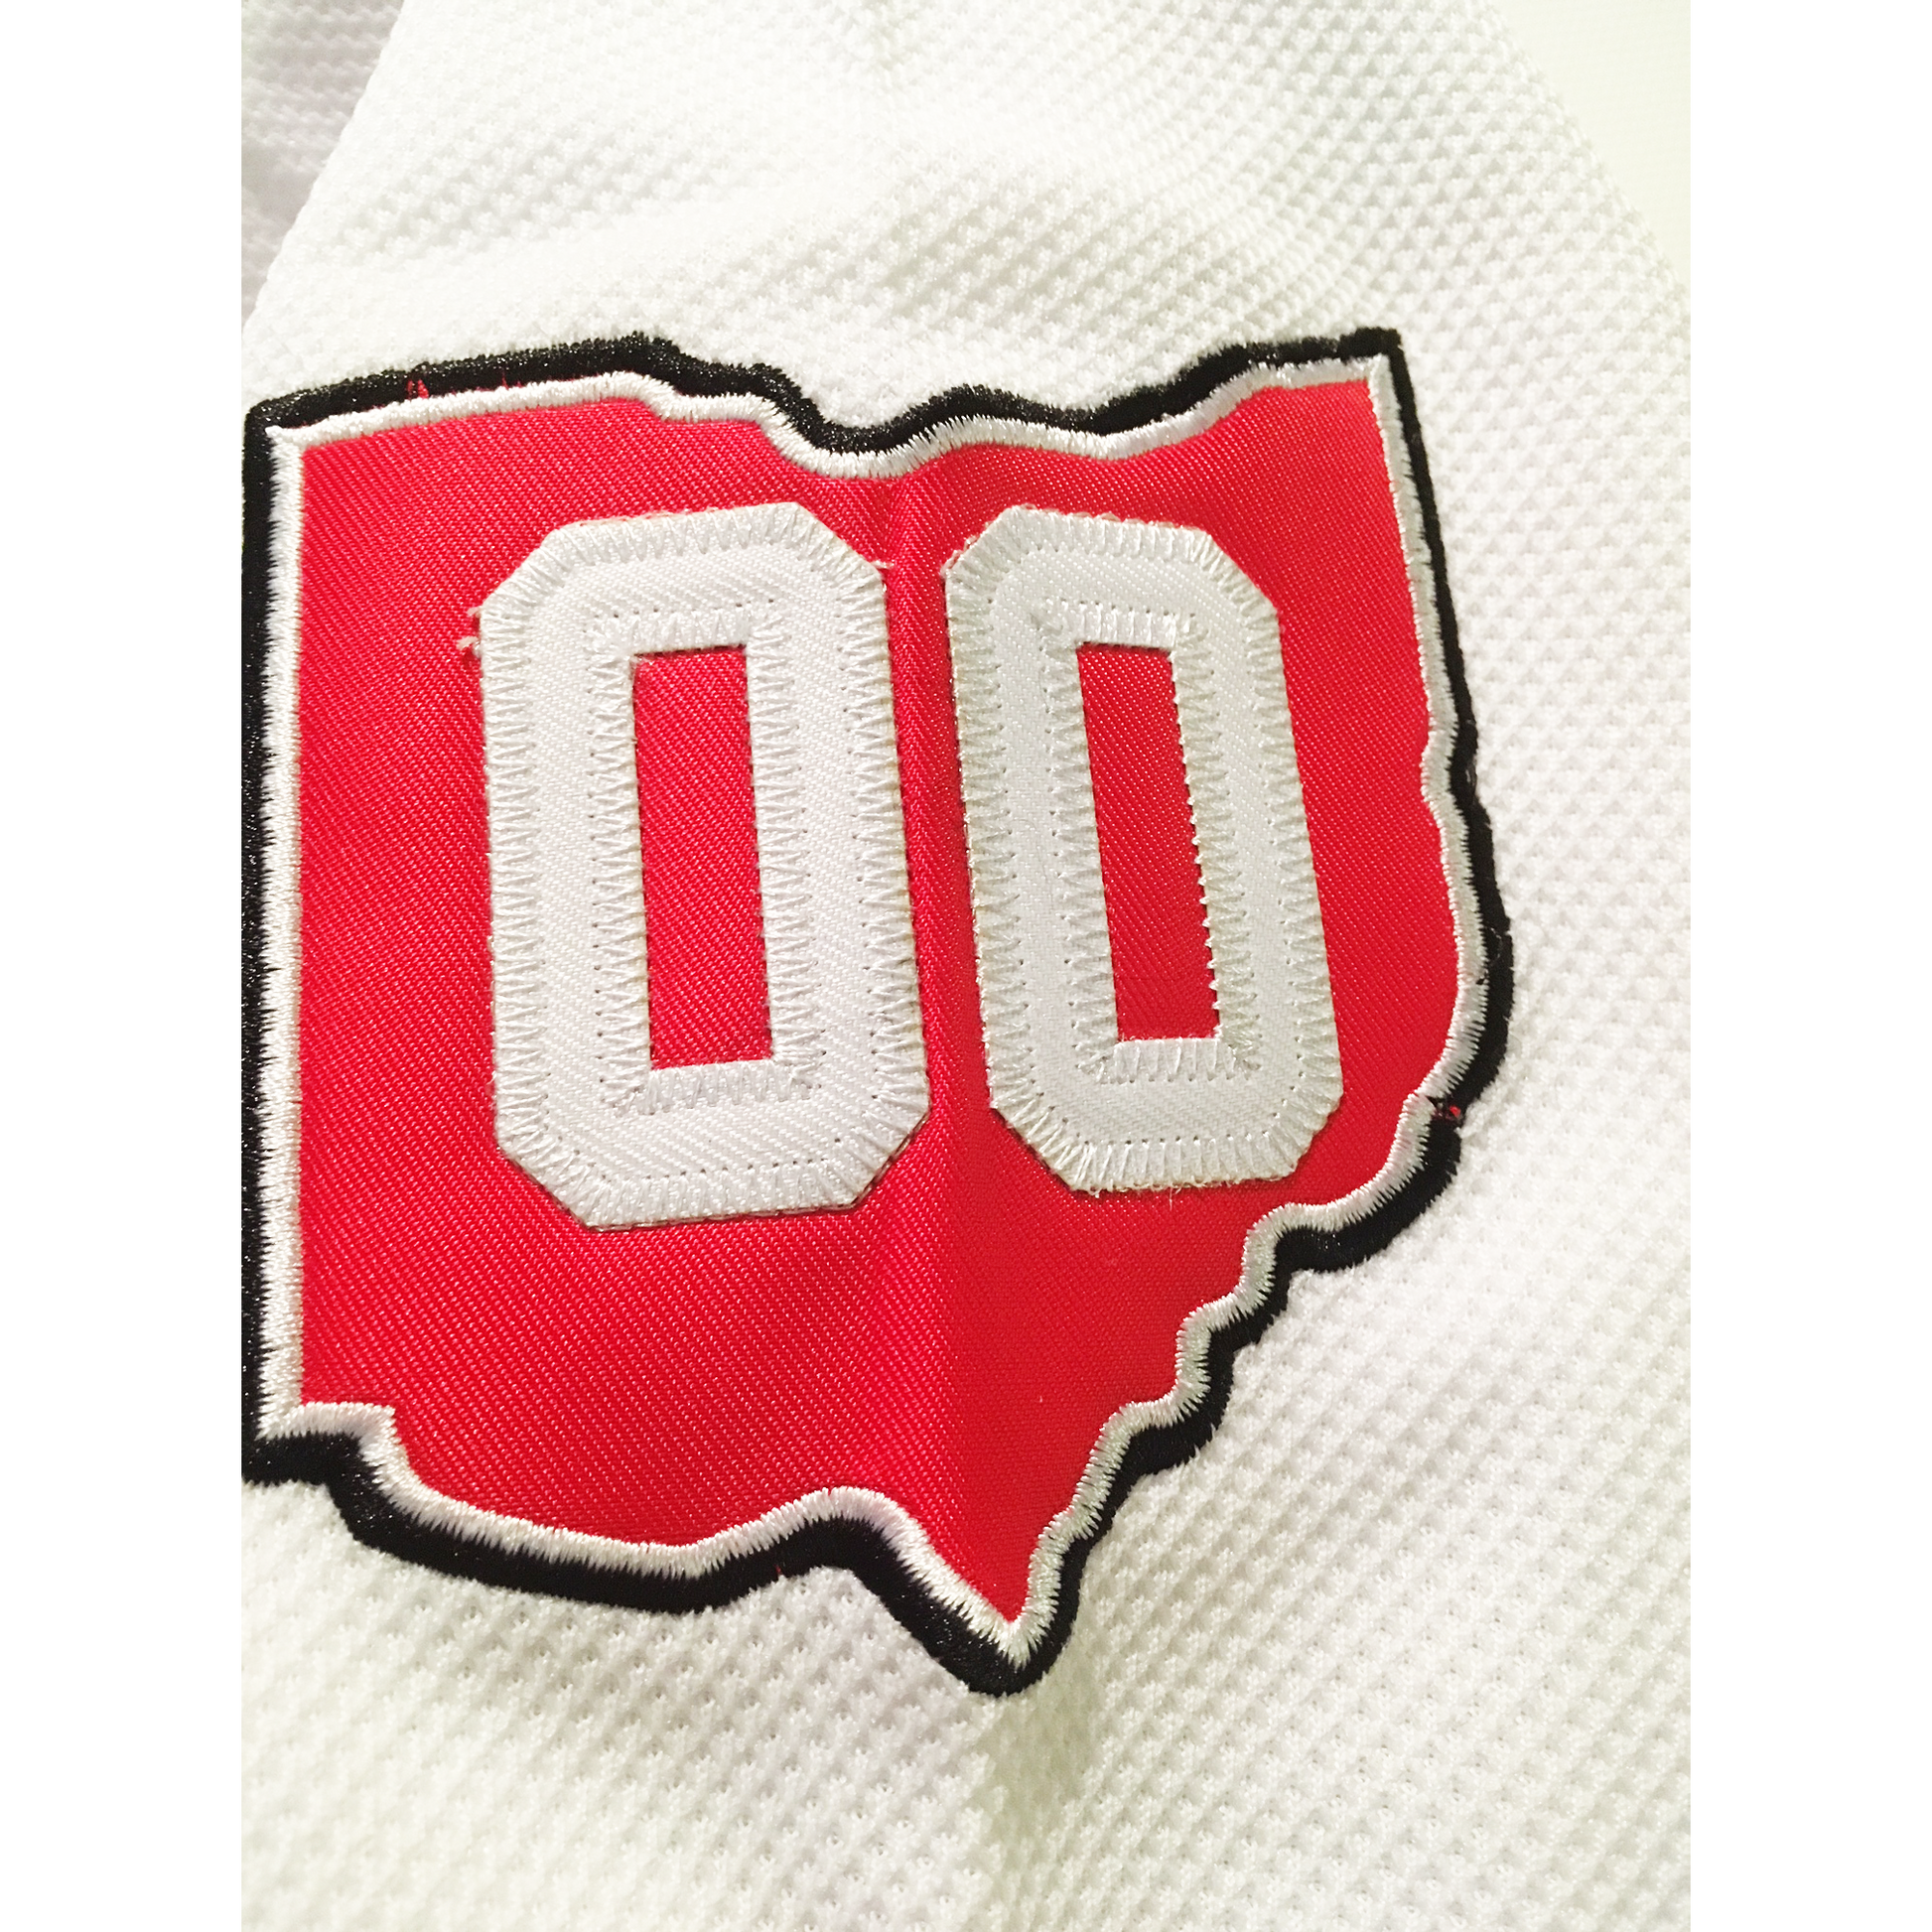 Barons Red Replica Jersey 